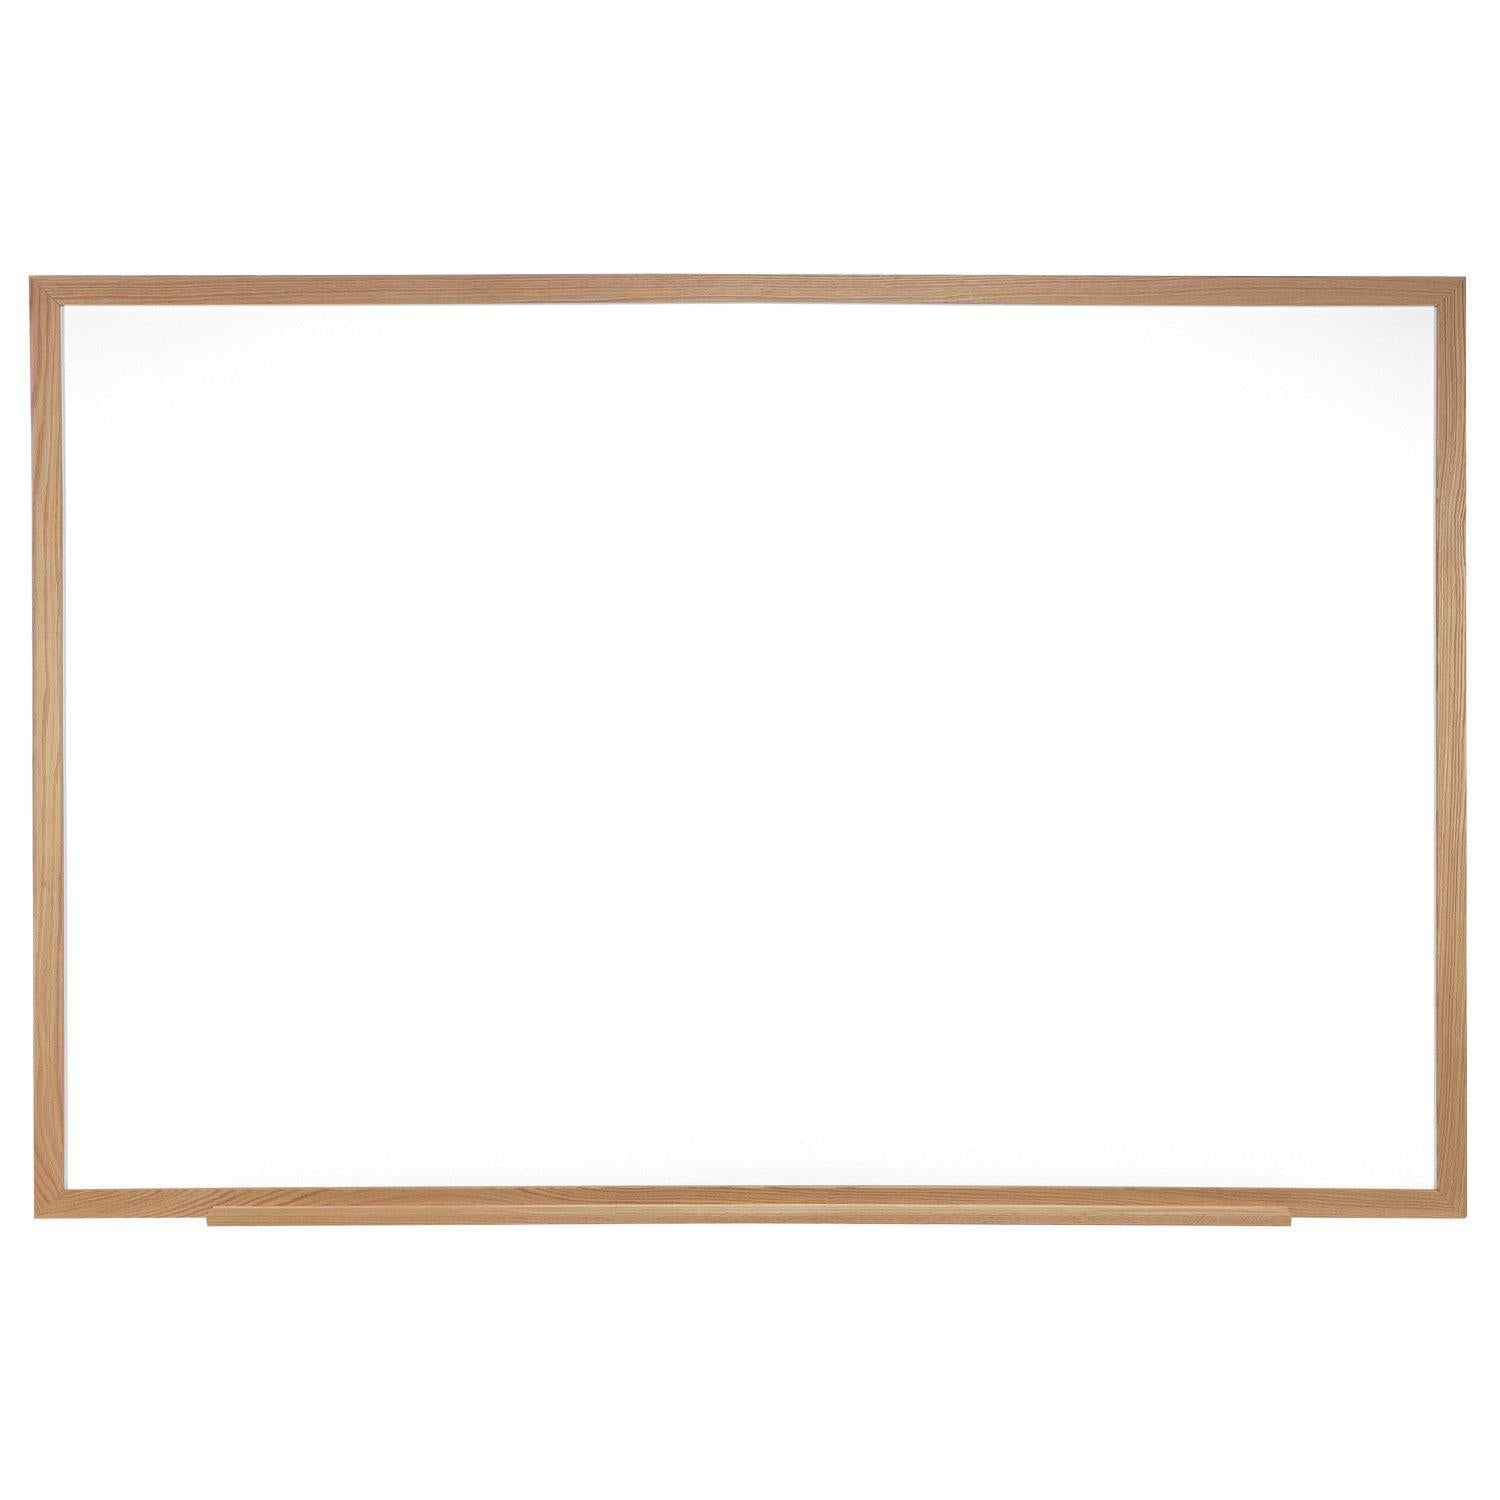 Magnetic Porcelain Whiteboard with Detachable Marker Tray, Wood Frame, 4' H x 5' W, LIFETIME WARRANTY